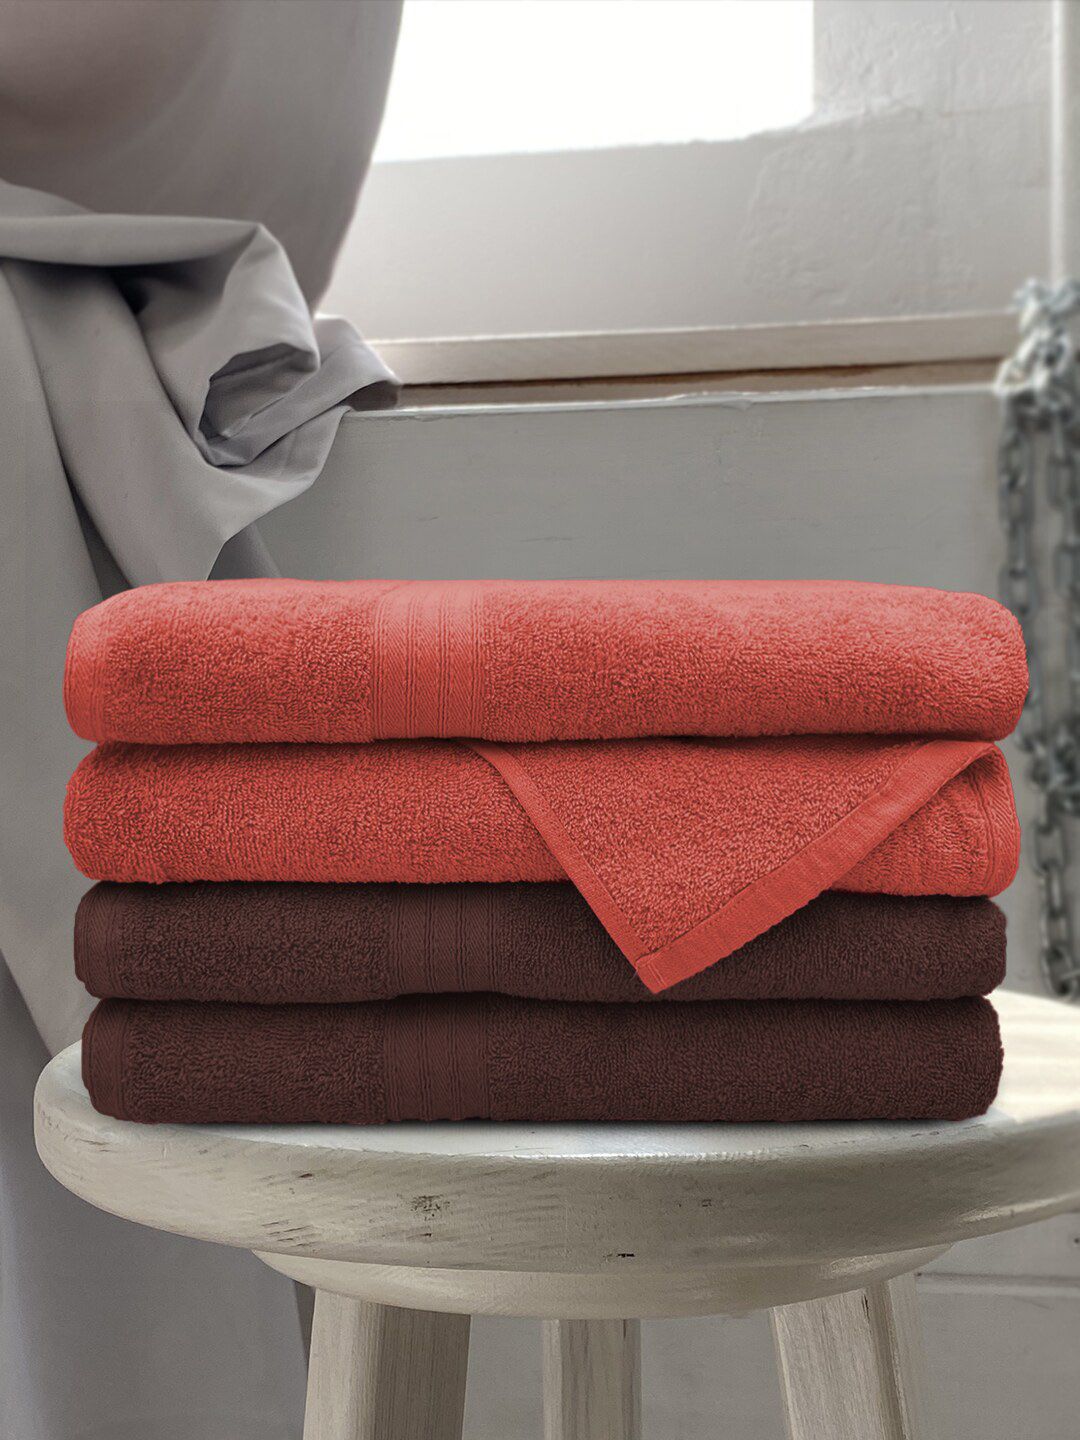 Aura Set Of 4 Solid 500 GSM Cotton Bath Towels Price in India